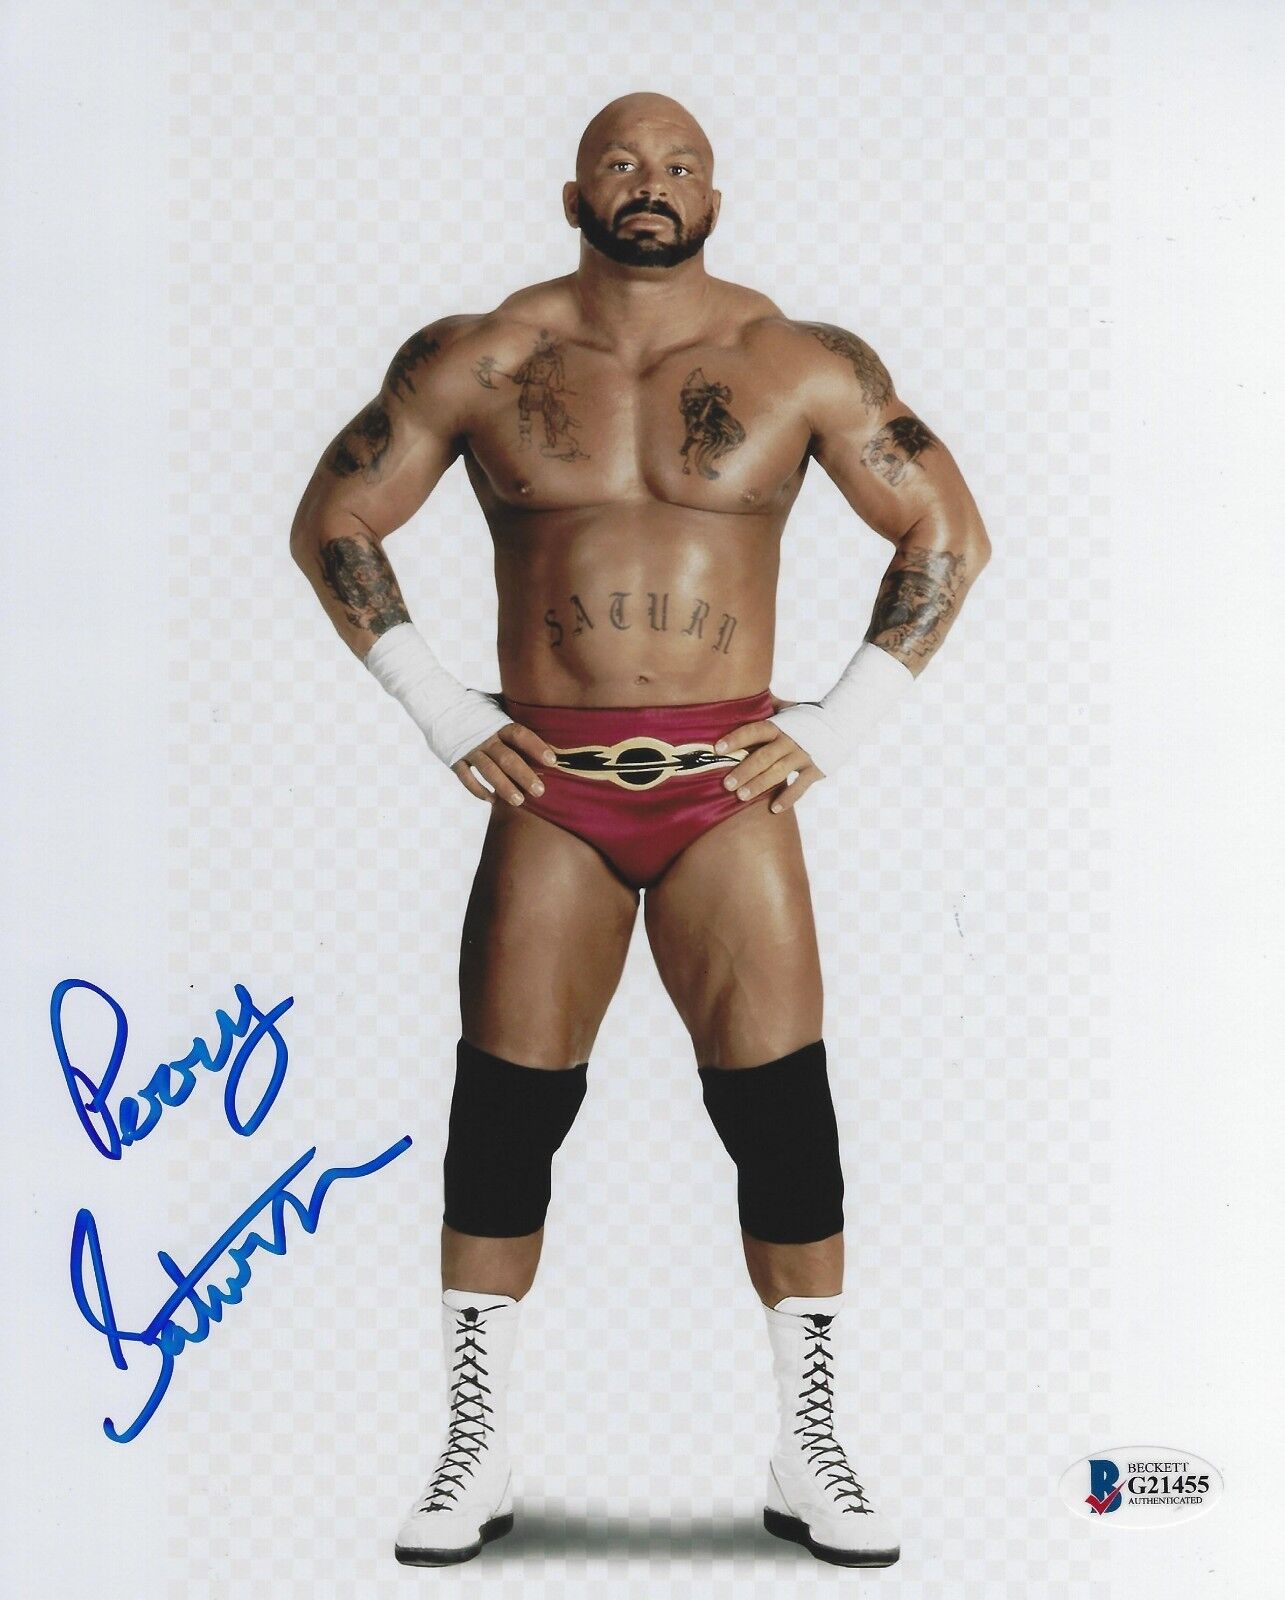 Perry Saturn Signed 8x10 Photo Poster painting BAS Beckett COA WWE WCW ECW Pro Picture Autograph